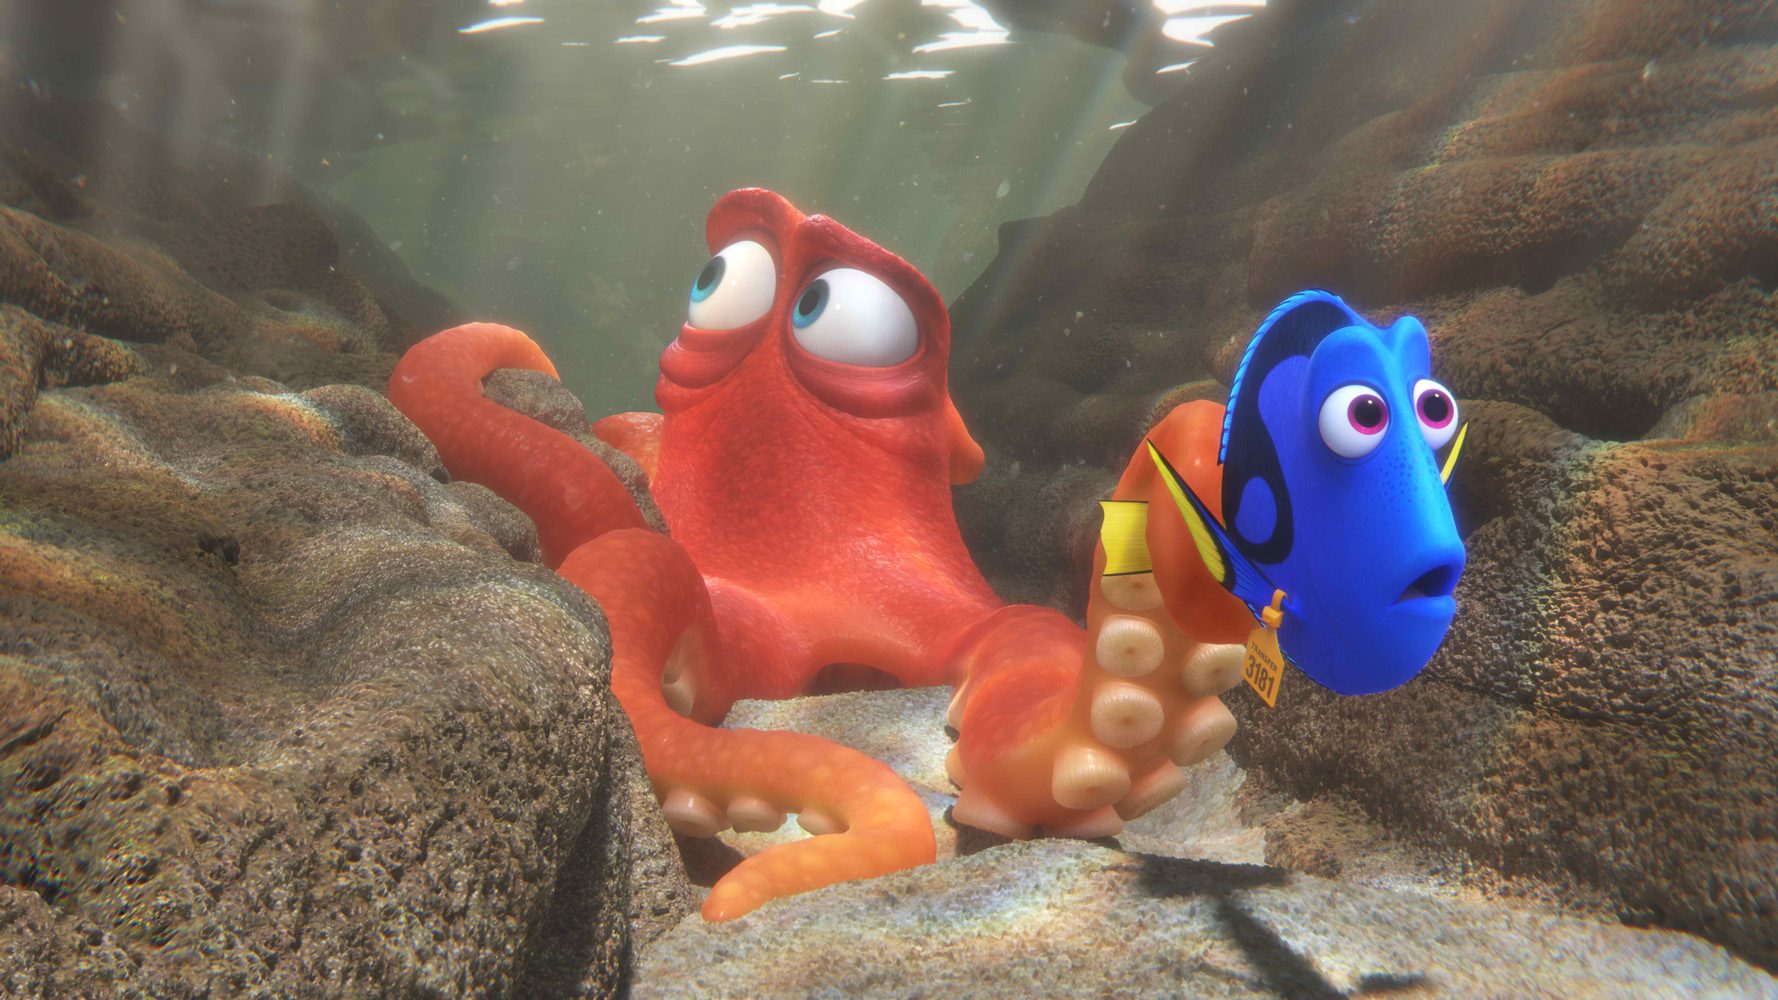 Movie reviews: What critics are saying about ‘Finding Dory’